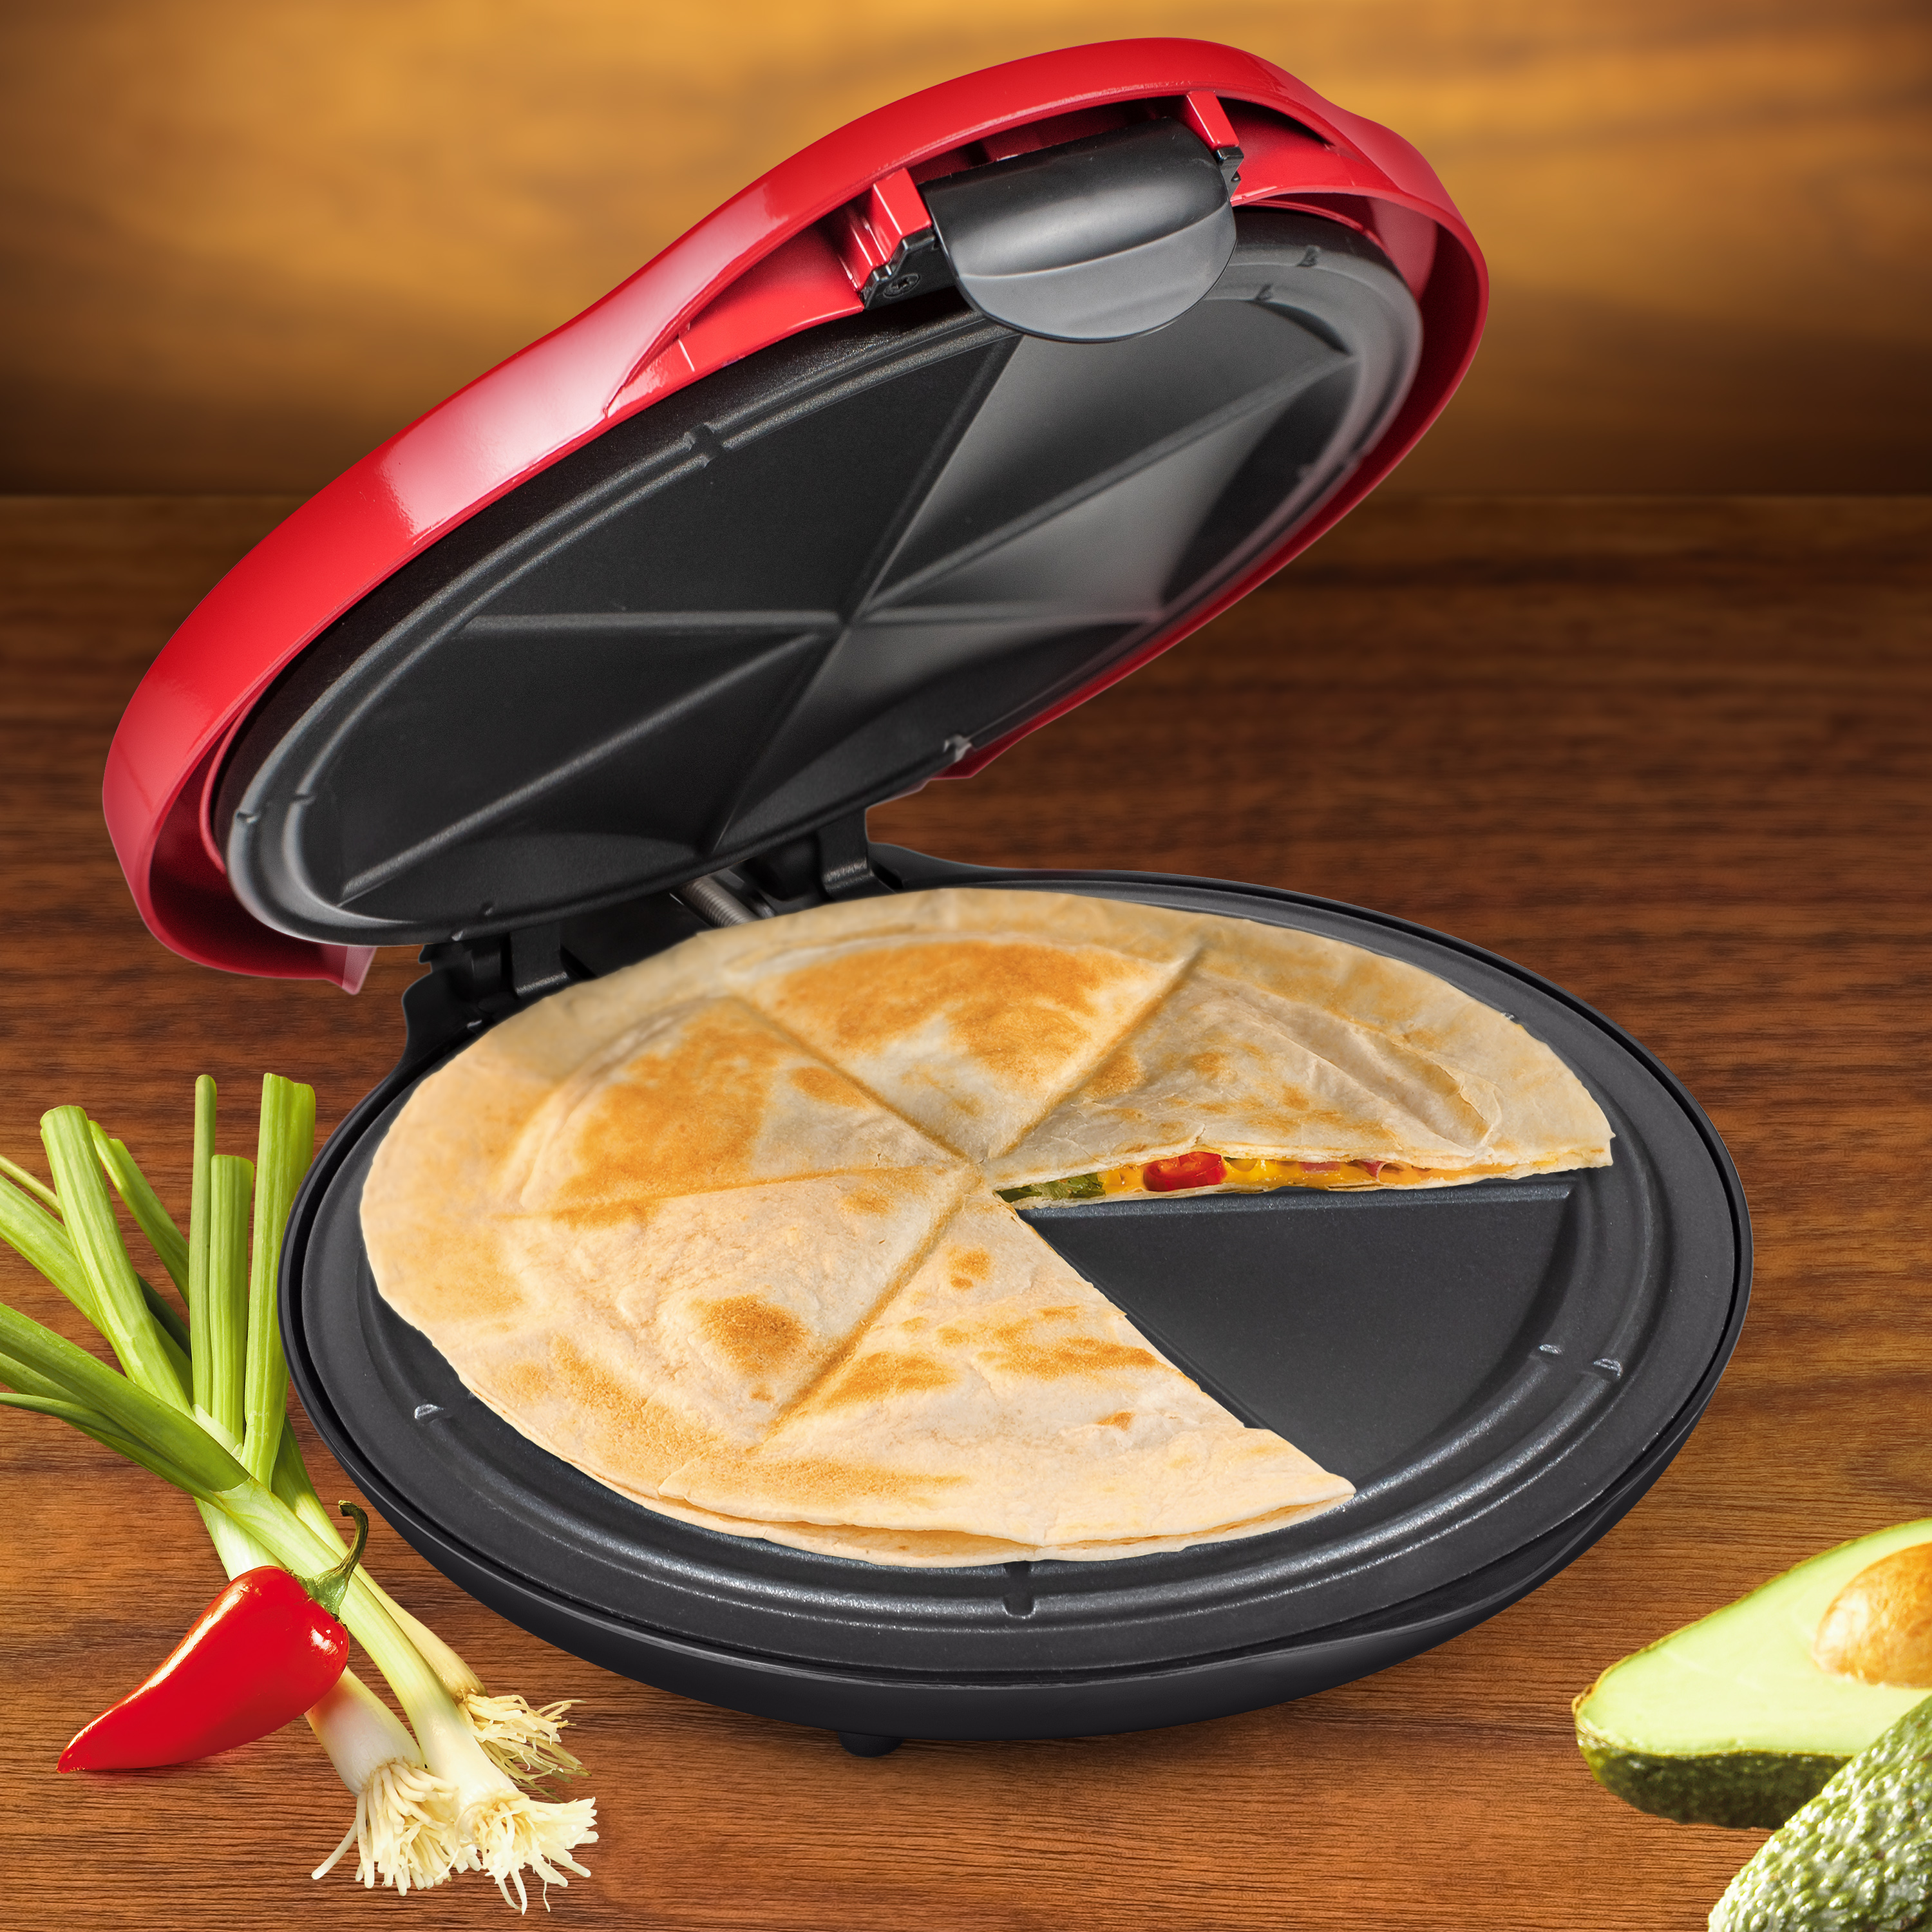 Taco Tuesday 6-Wedge Electric Quesadilla Maker with Extra Stuffing Latch, Red 10” - image 5 of 6